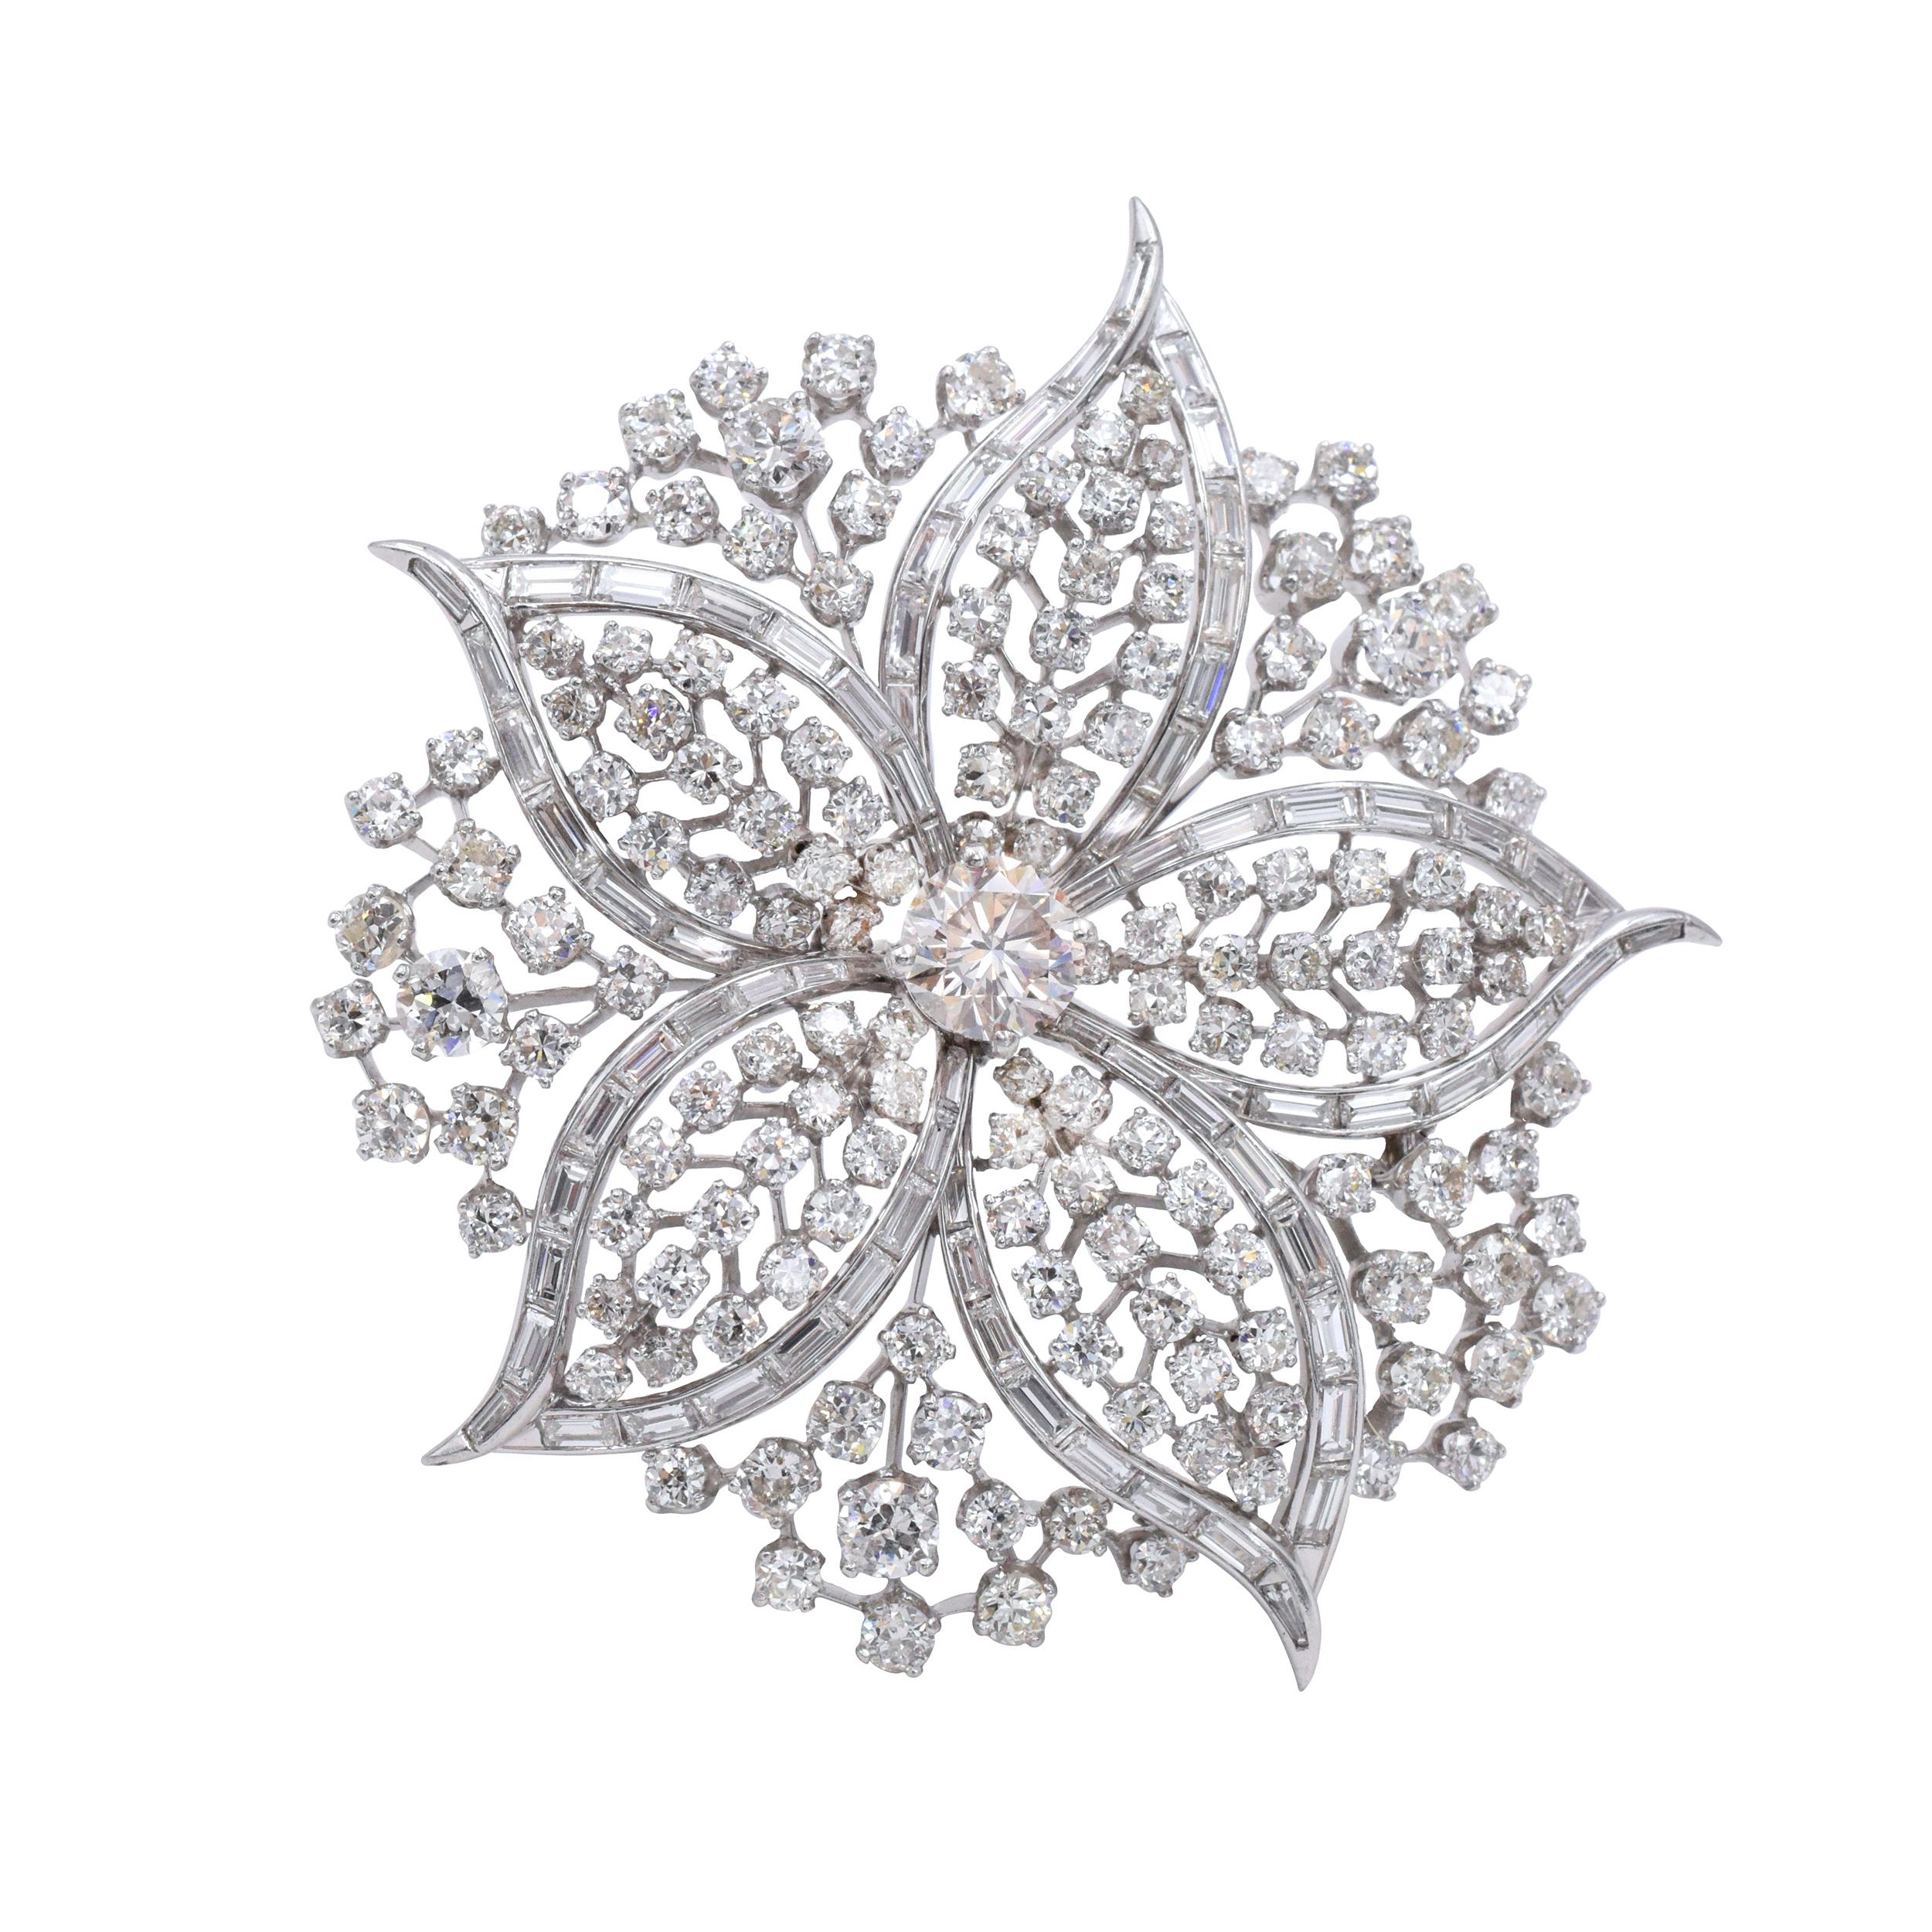 Harry Winston Diamond Flower brooch. This brooch has about 230 diamonds, including the center stone, weighting approximately 20carats , all set in platinum The center diamond is about 1.50carats.
 Signed Winston. 
Measurements: about 2.25 inches by